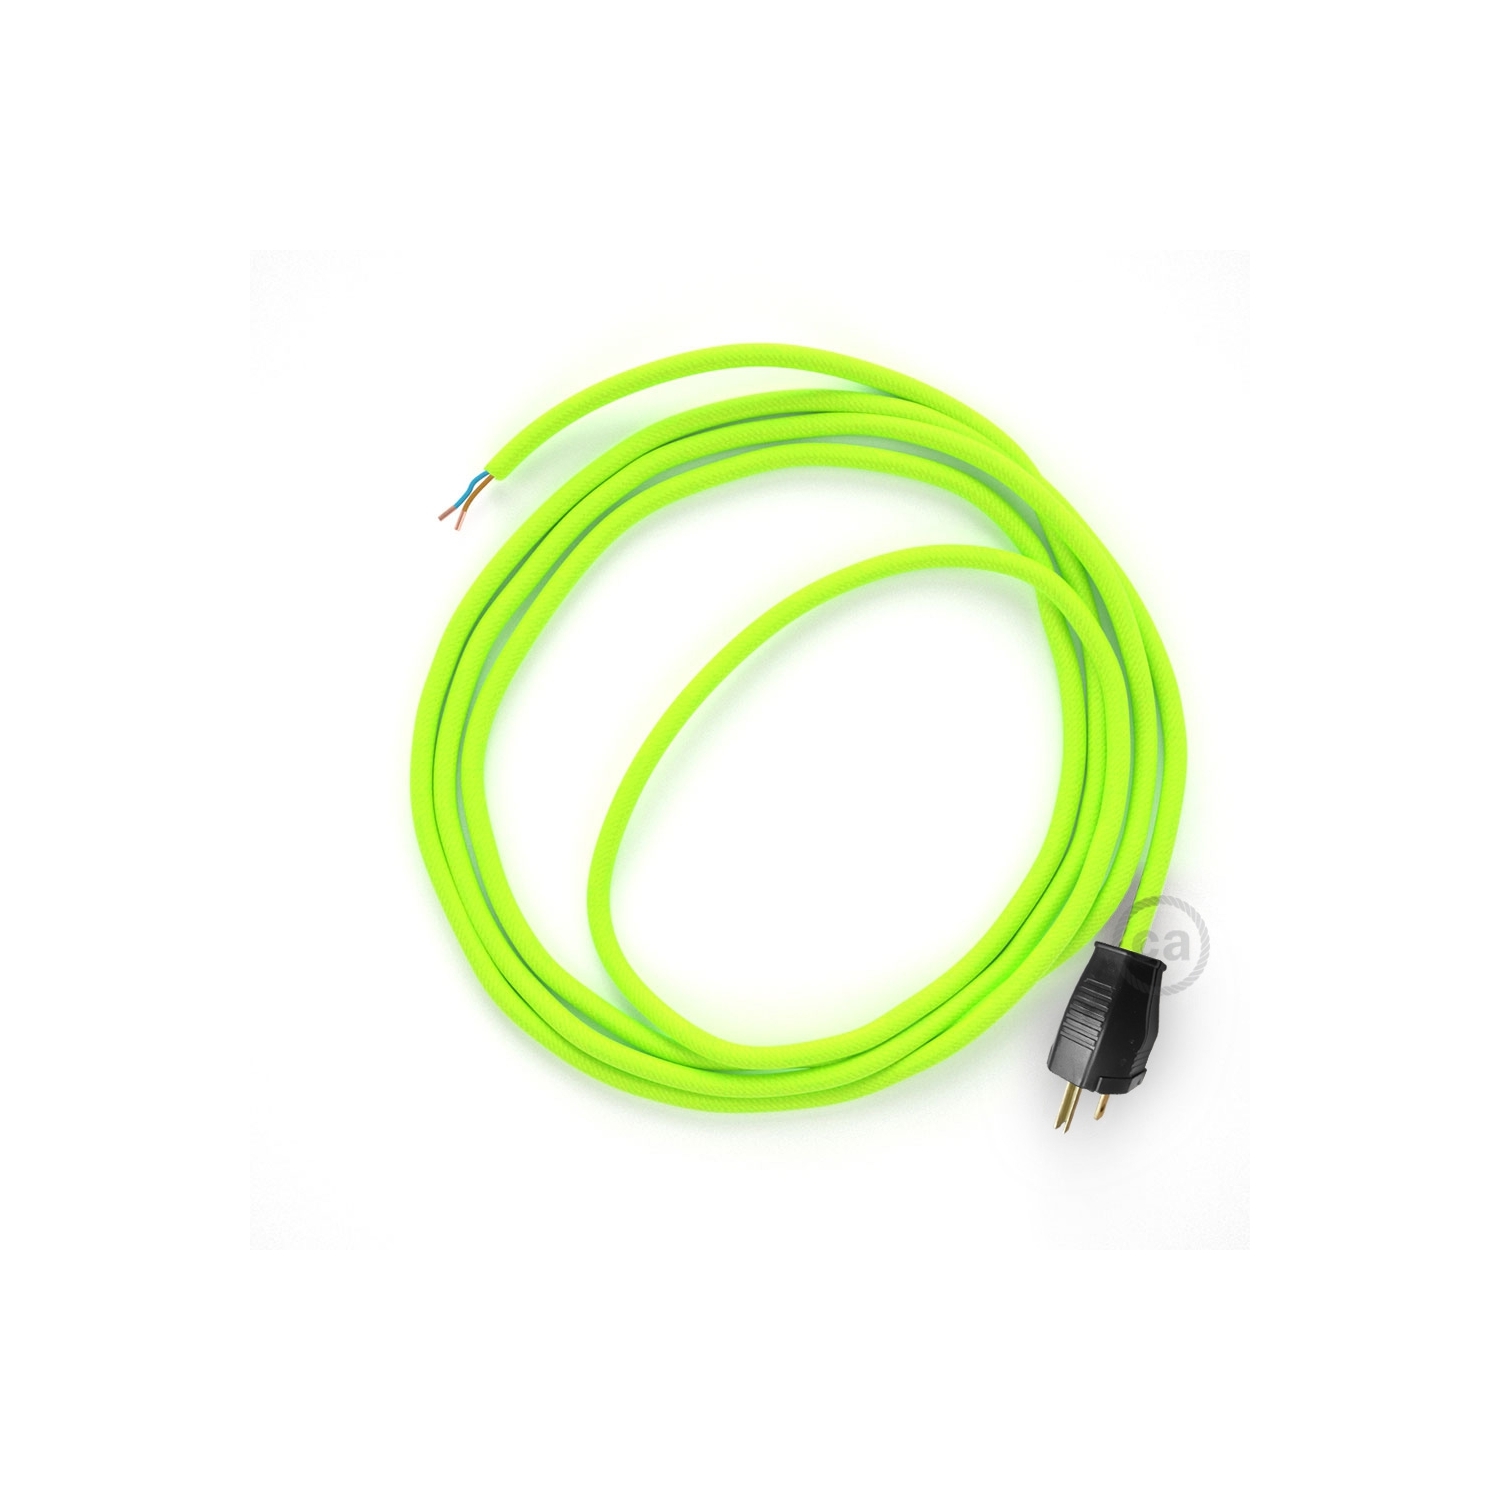 Cord-set - RF10 Neon Yellow Covered Round Cable